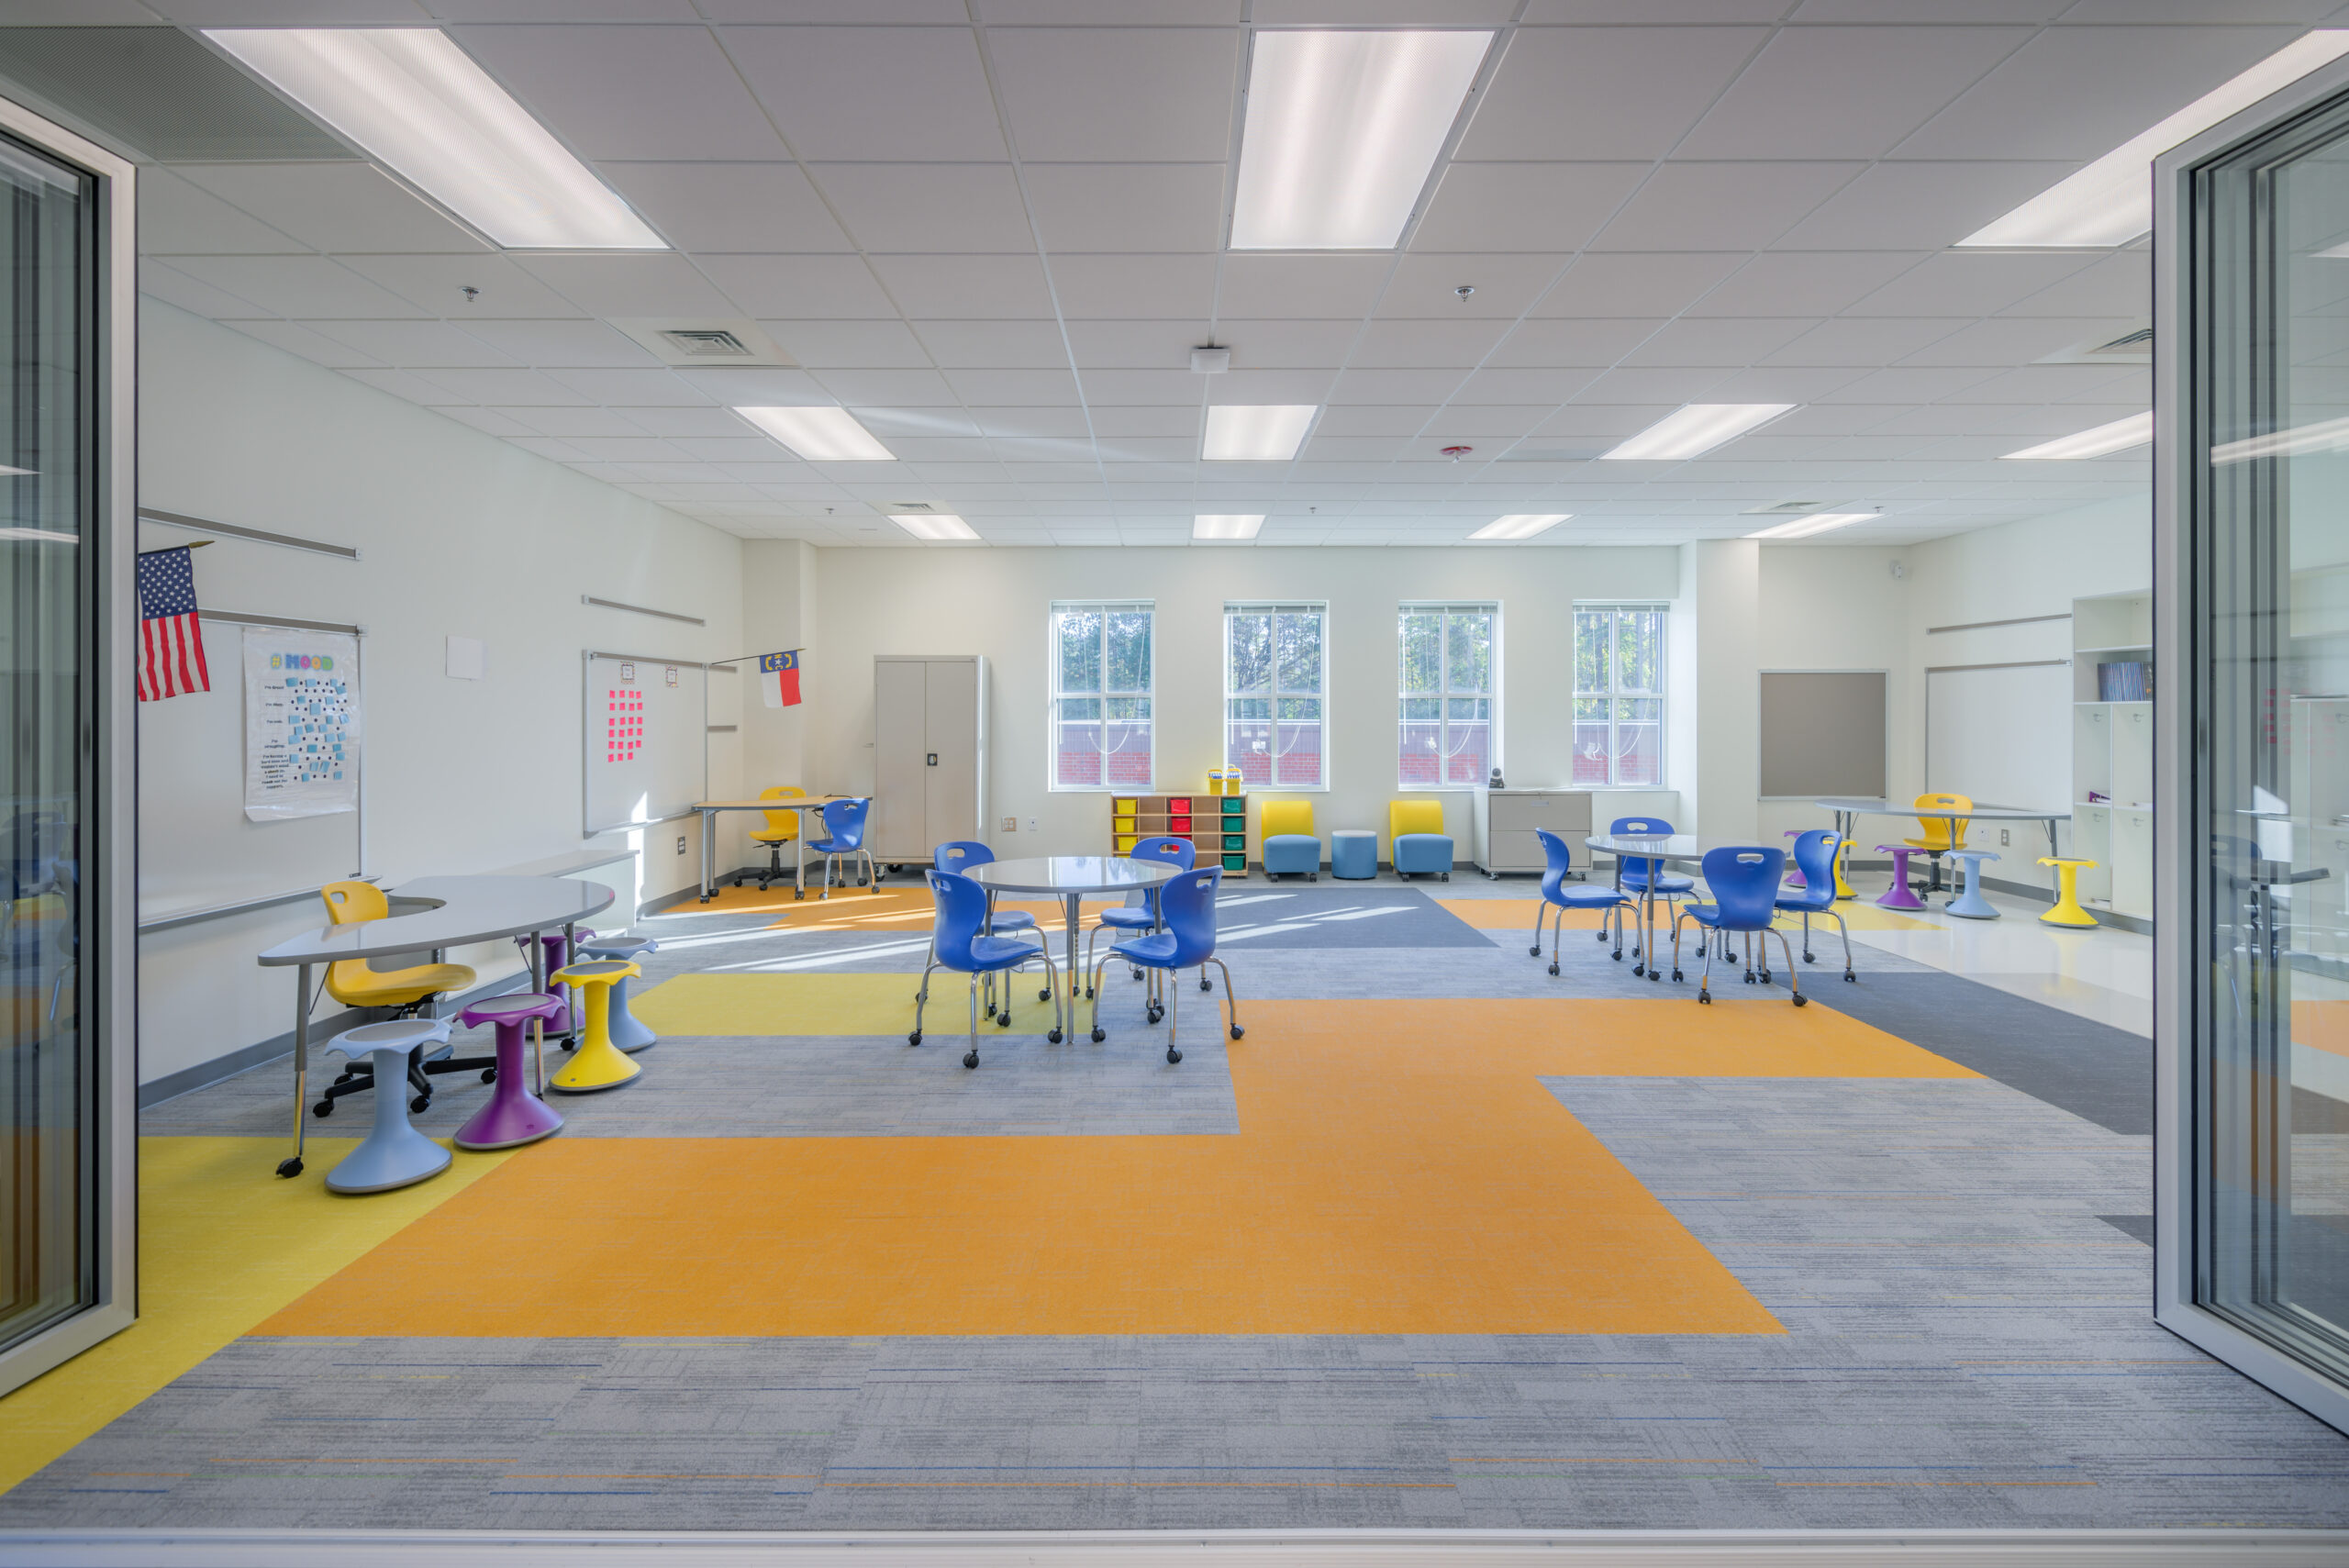 Barton Pond Elementary School Flex Space and Classroom with Whiteboards, Collaborative Work Spaces, and Transparent Accordion Room Dividers